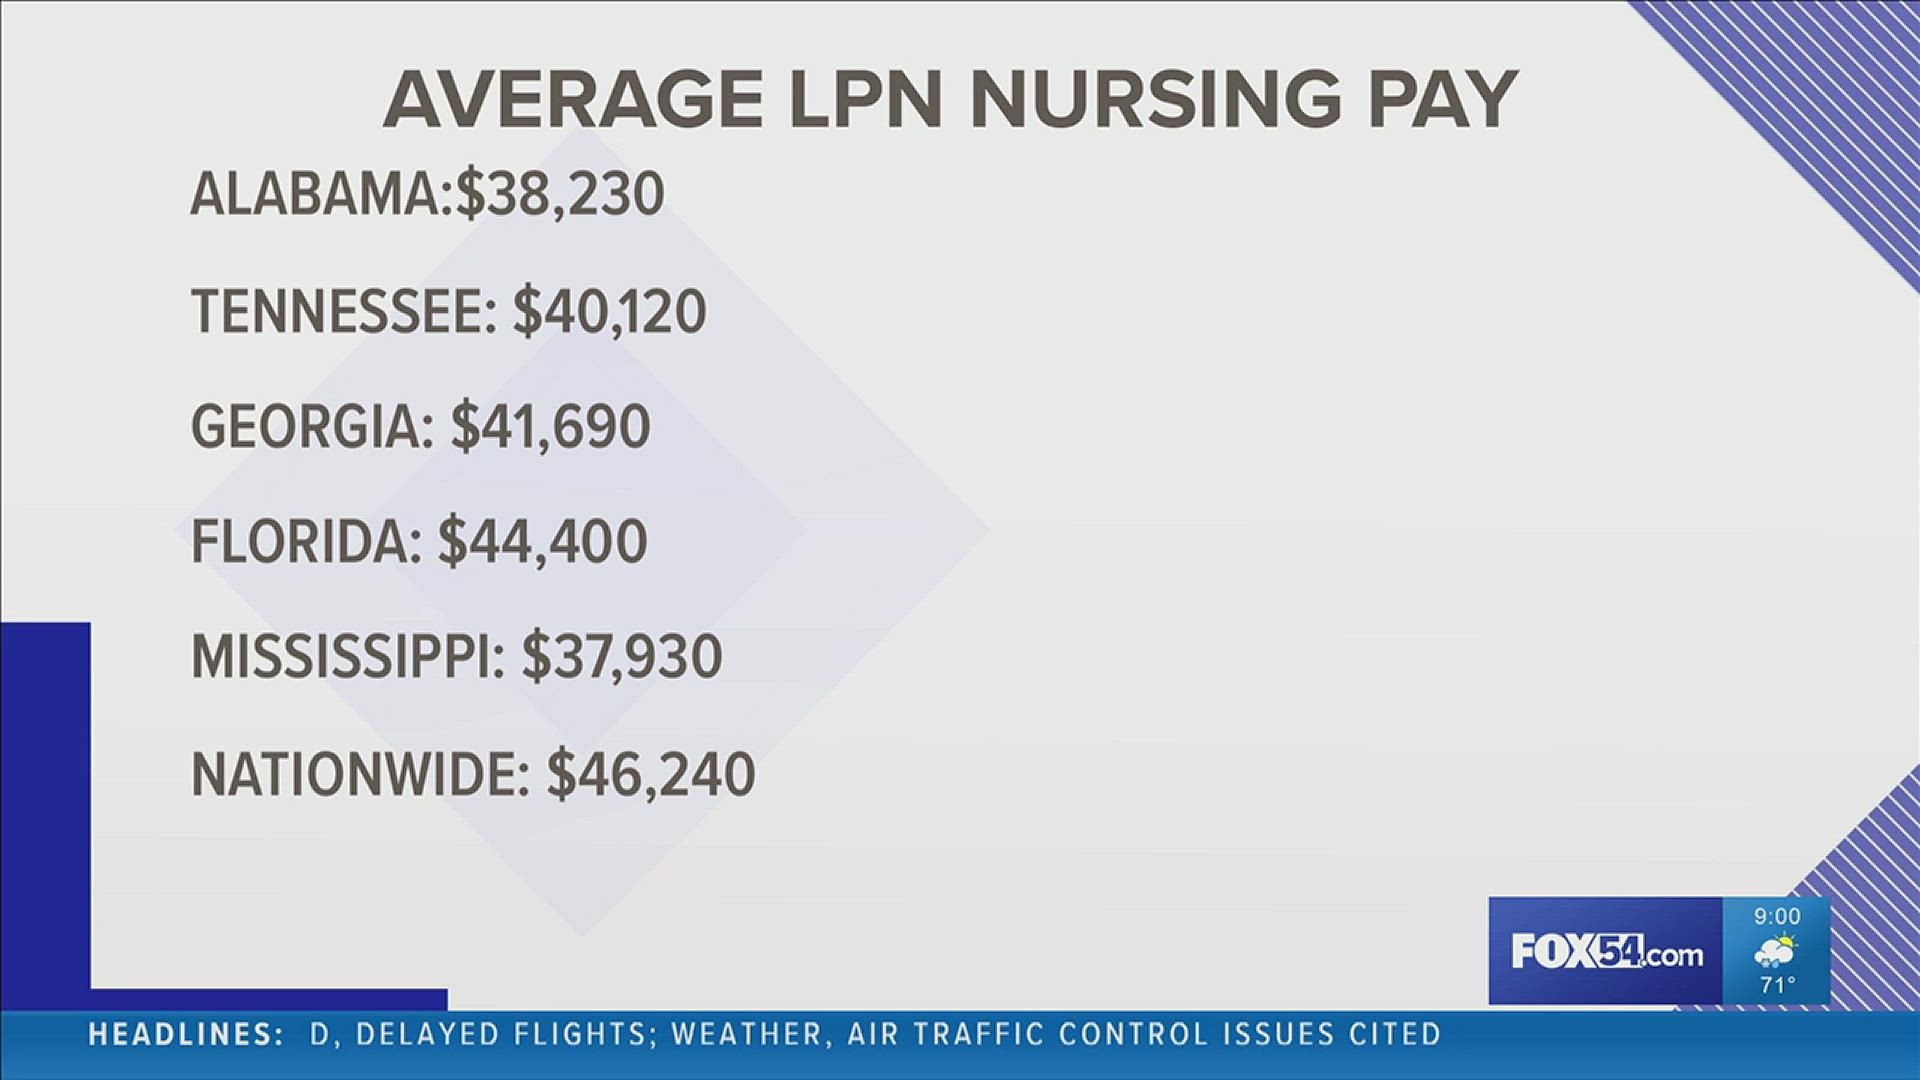 Like much of the U.S., Alabama is struggling with a nursing shortage. Low pay is part of the reason.